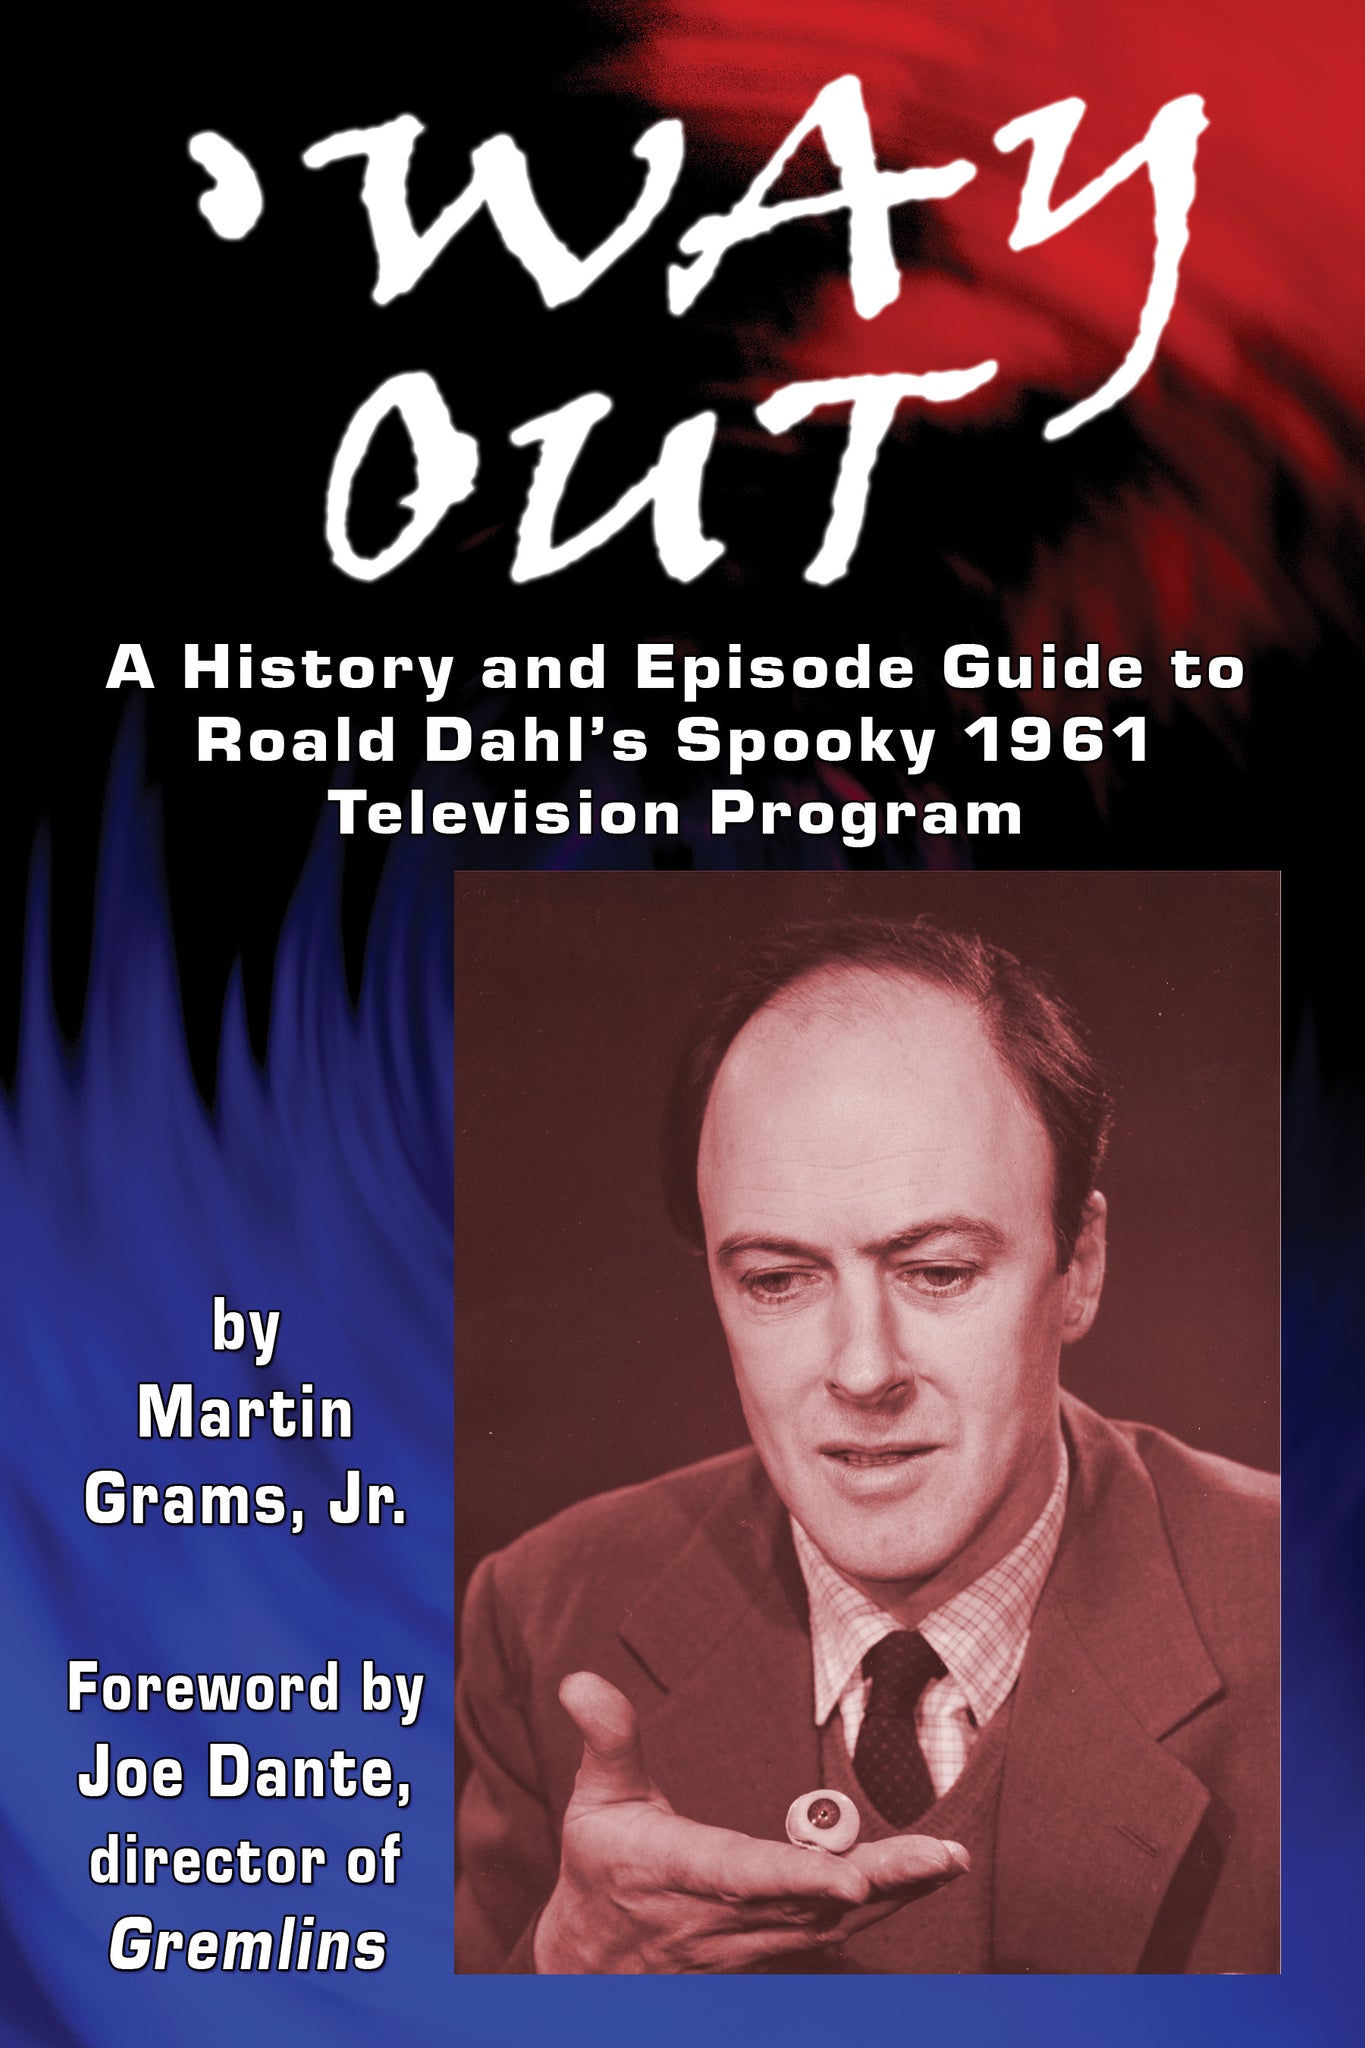 'WAY OUT: A History and Episode Guide to Roald Dahl's Spooky 1961 Television Program